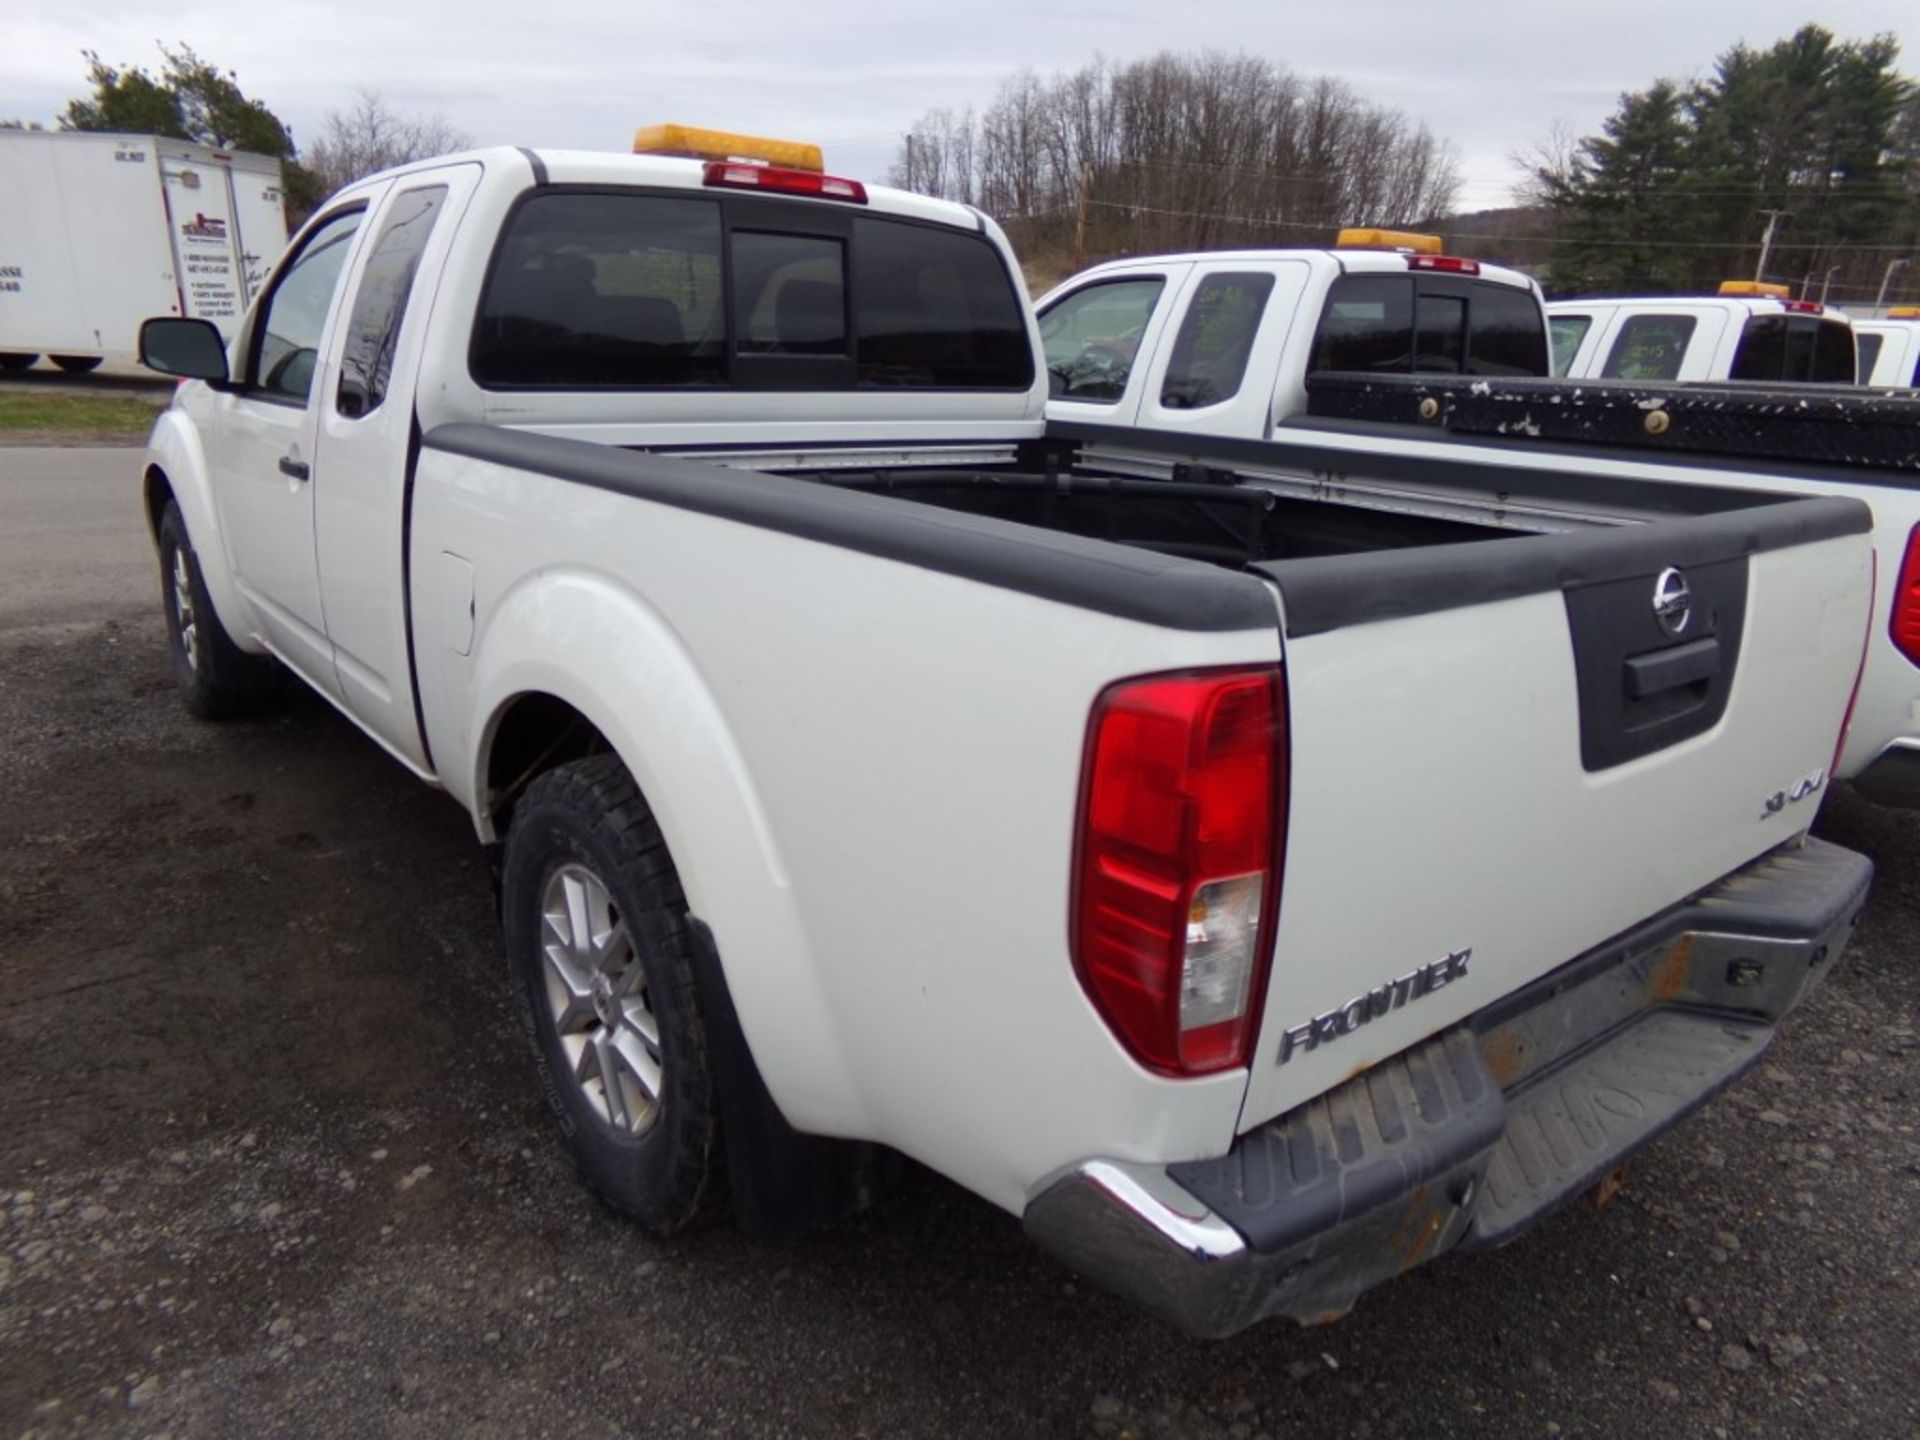 2015 Nissan Frontier SV 4 x 4 Ext. Cab, White, 126,409 Miles, Orange Light on Roof, SOME SURFACE - Image 2 of 11